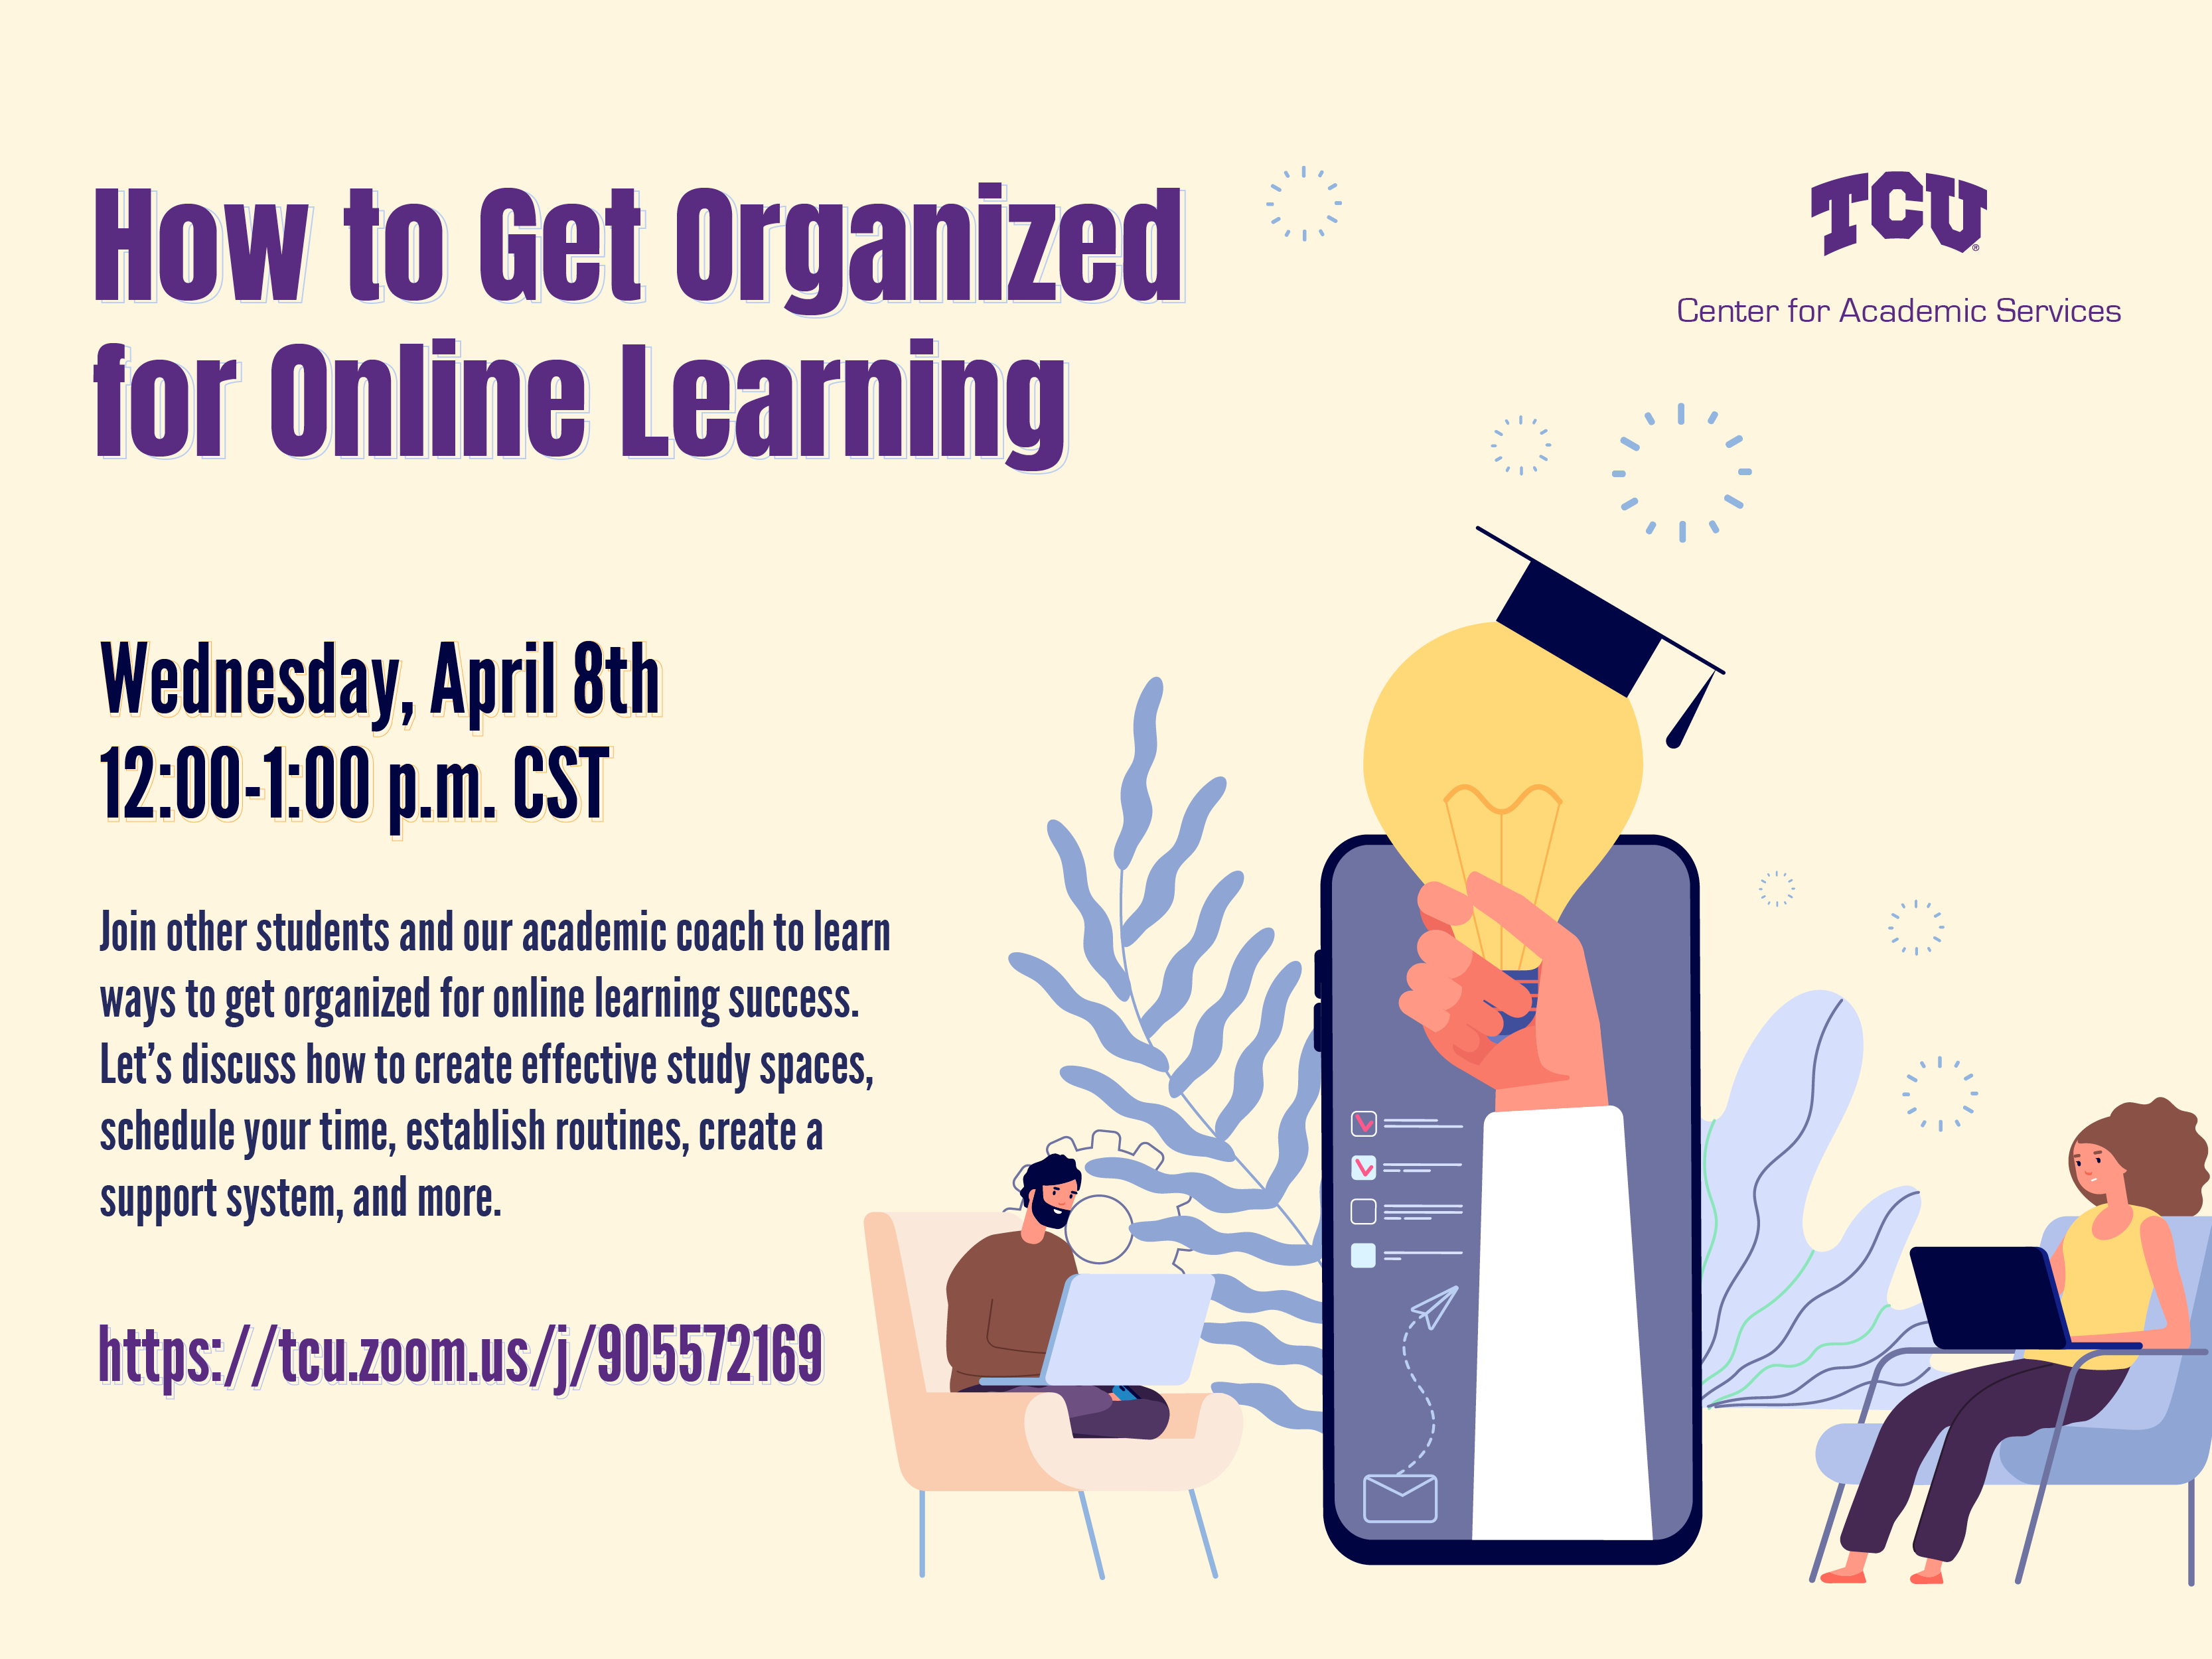 How to Get Organized for Online Learning